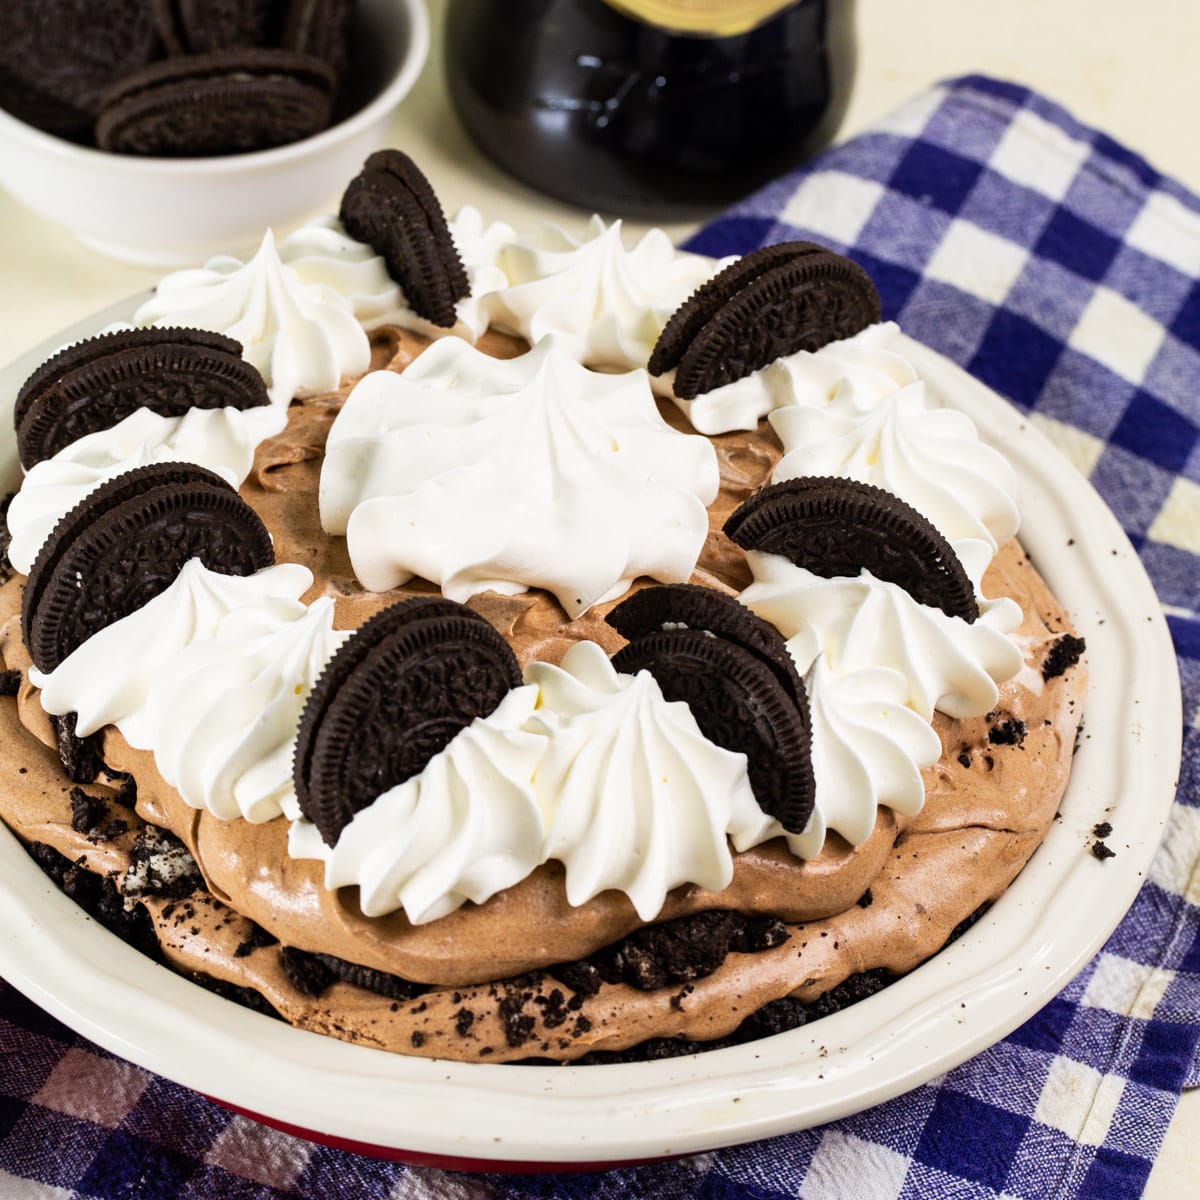 Whole Baileys Chocolate Cream Pie topped with whipped cream and oreo cookies.